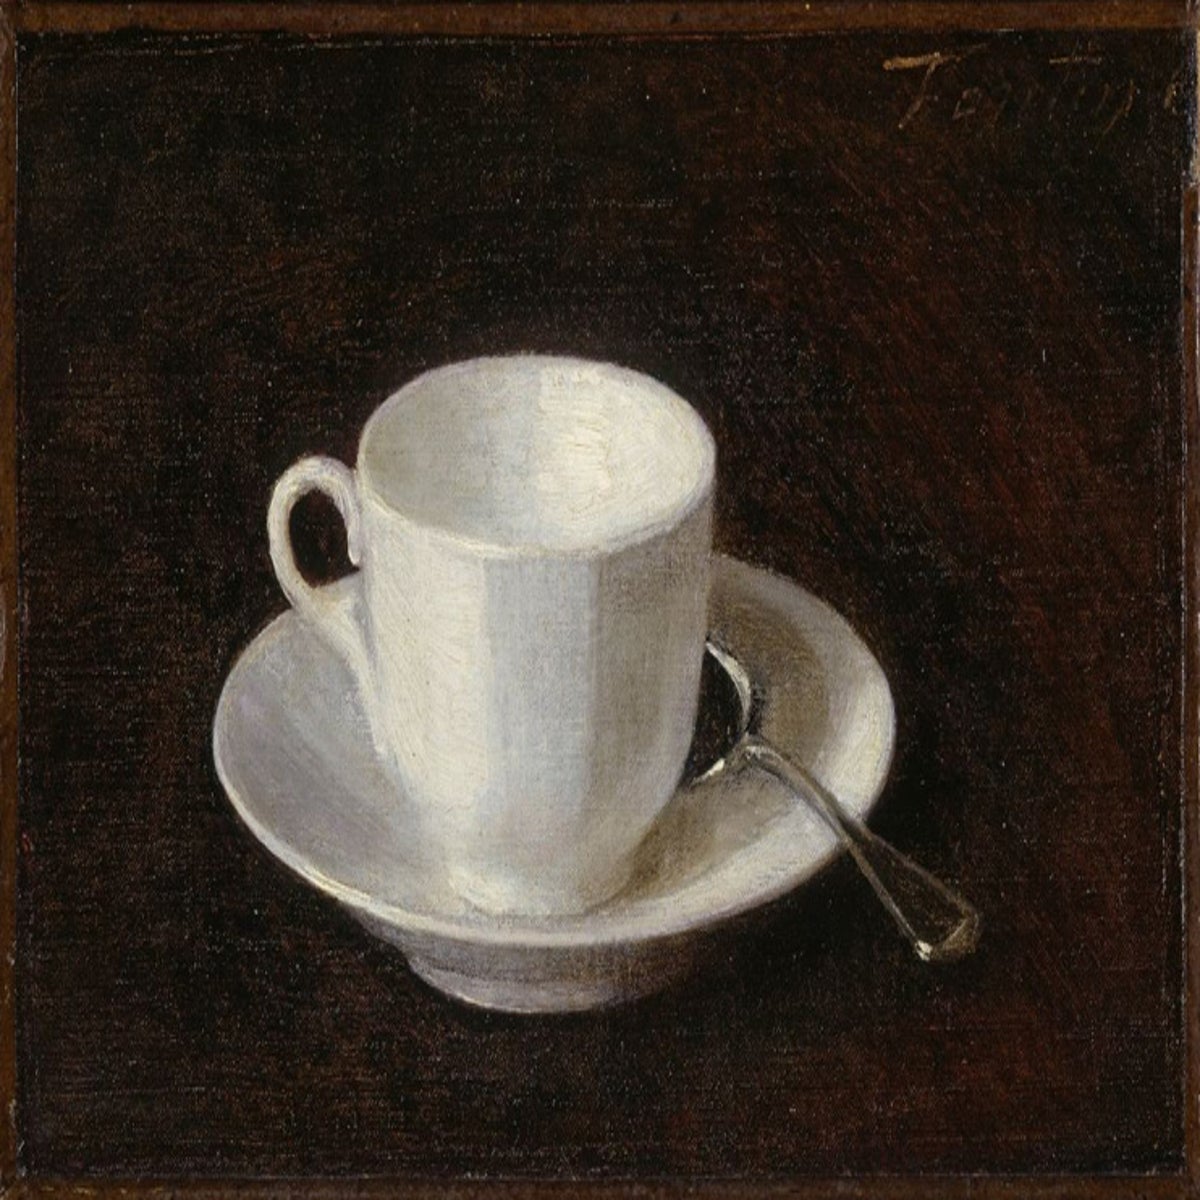 Fantin-Latour, Henri: White Cup and Saucer (1864)